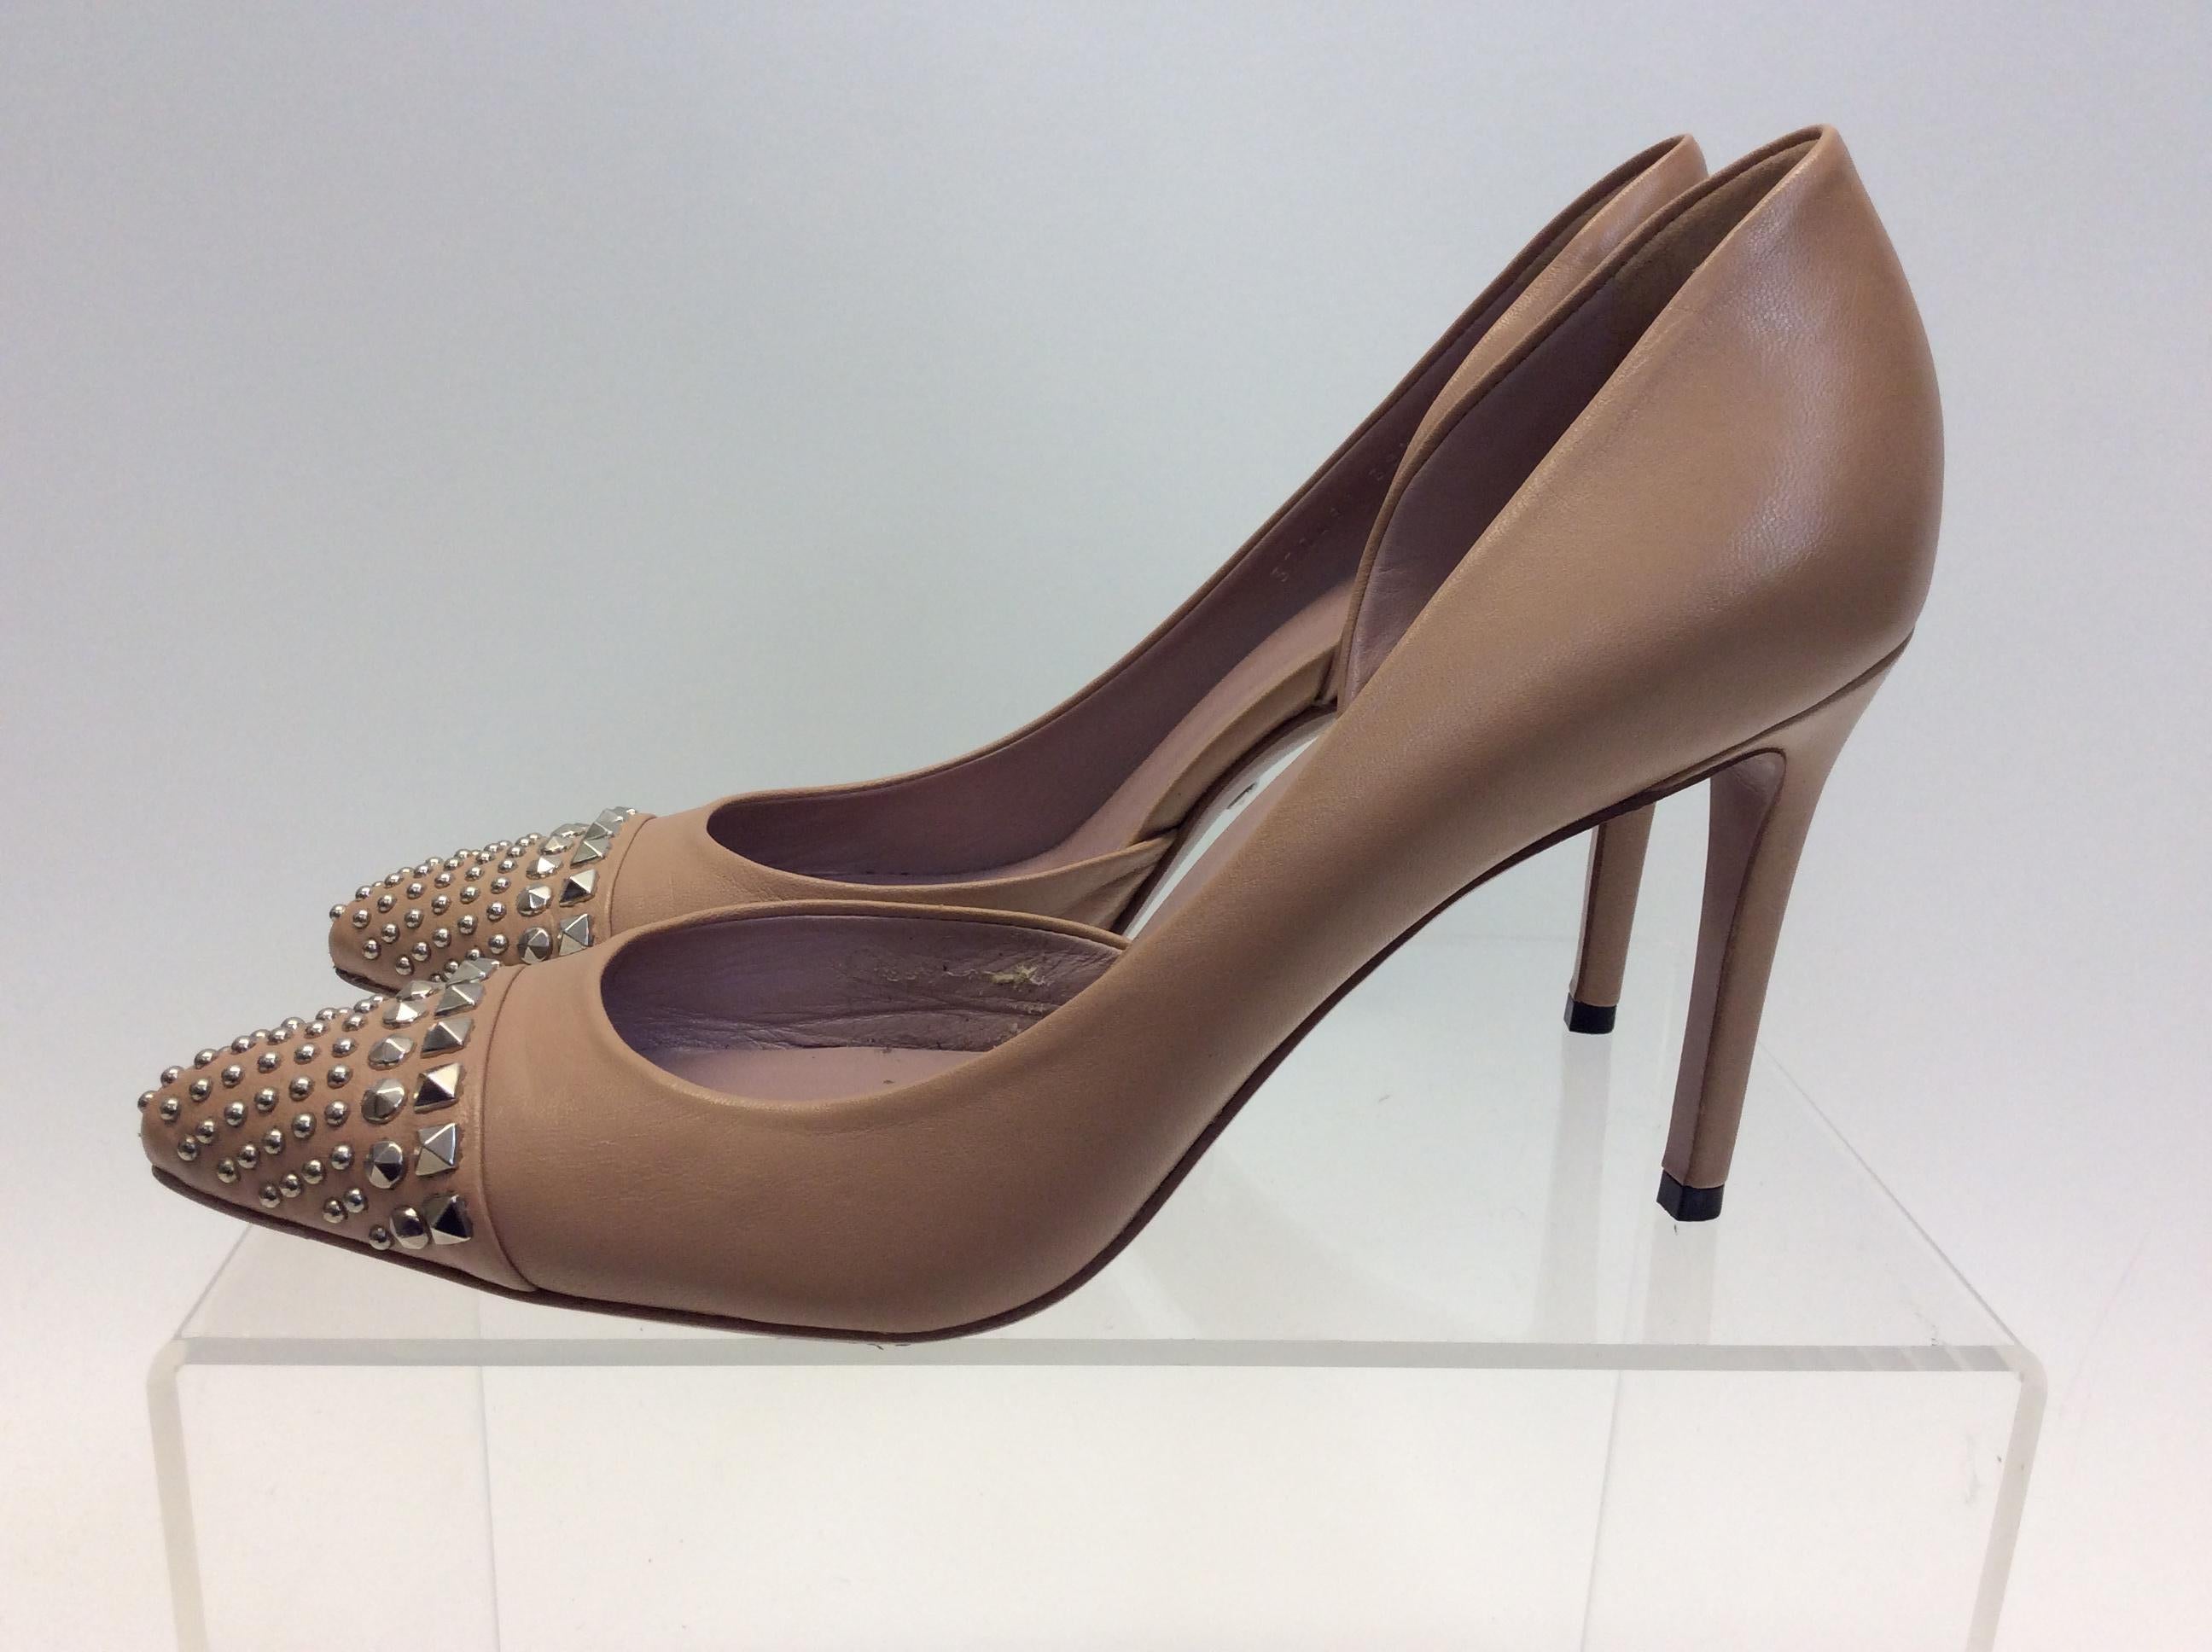 Gucci Tan Leather Studded Heels
$285
Made in Italy
Leather
Size 38.5
3.5